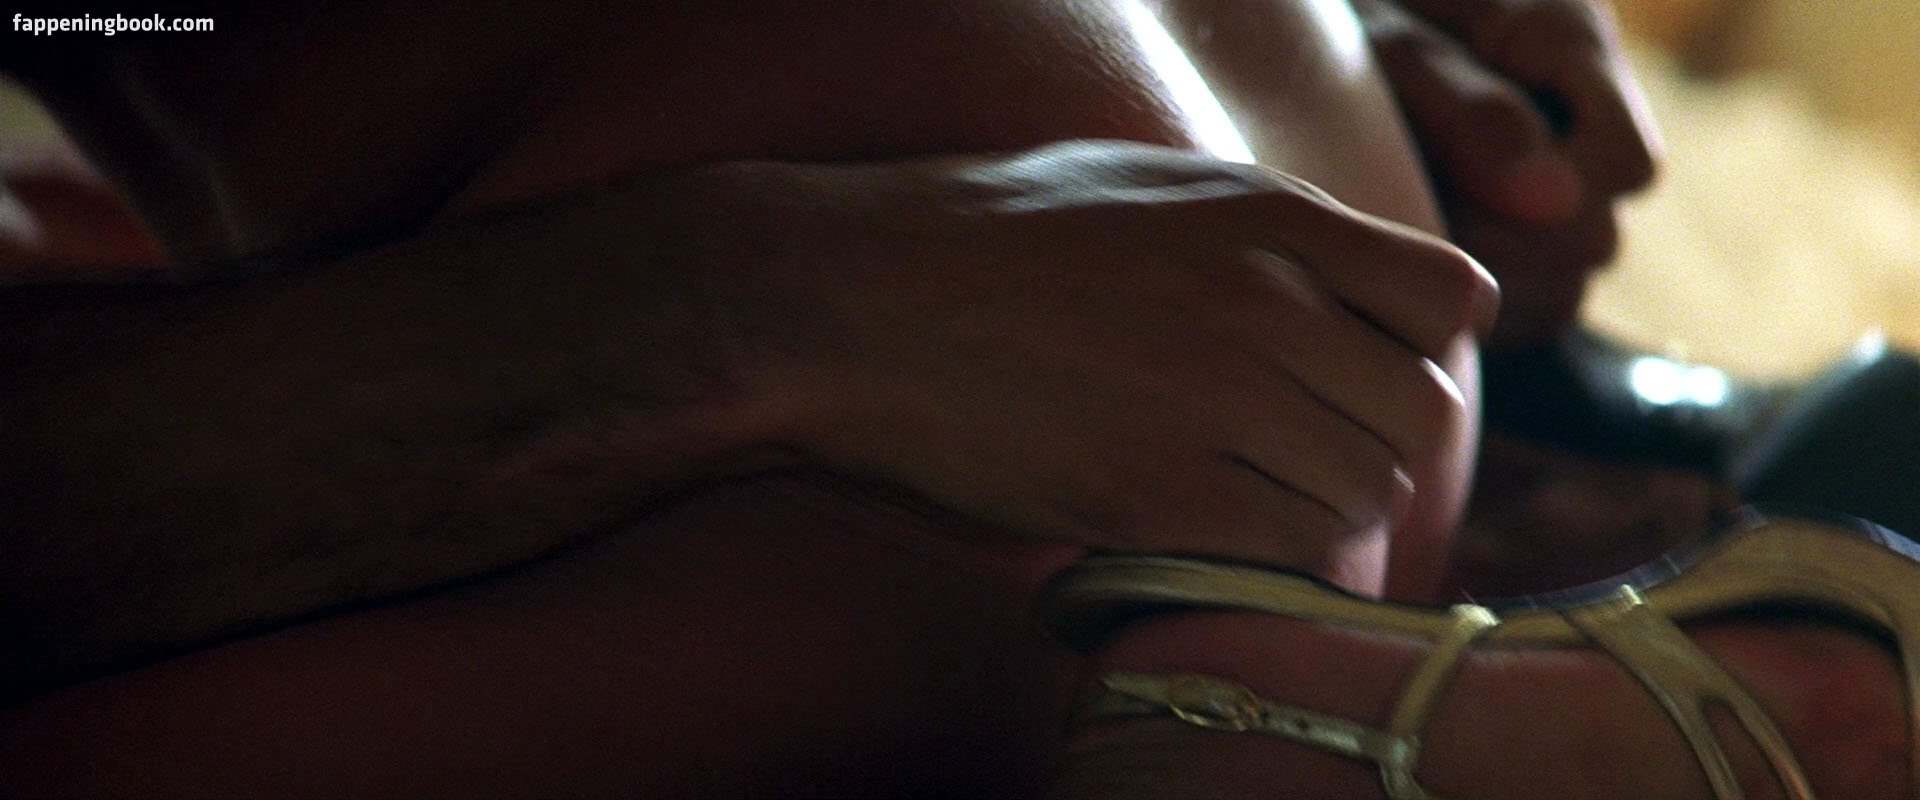 Theresa Russell Nude, The Fappening - Photo #525226 - FappeningBook.